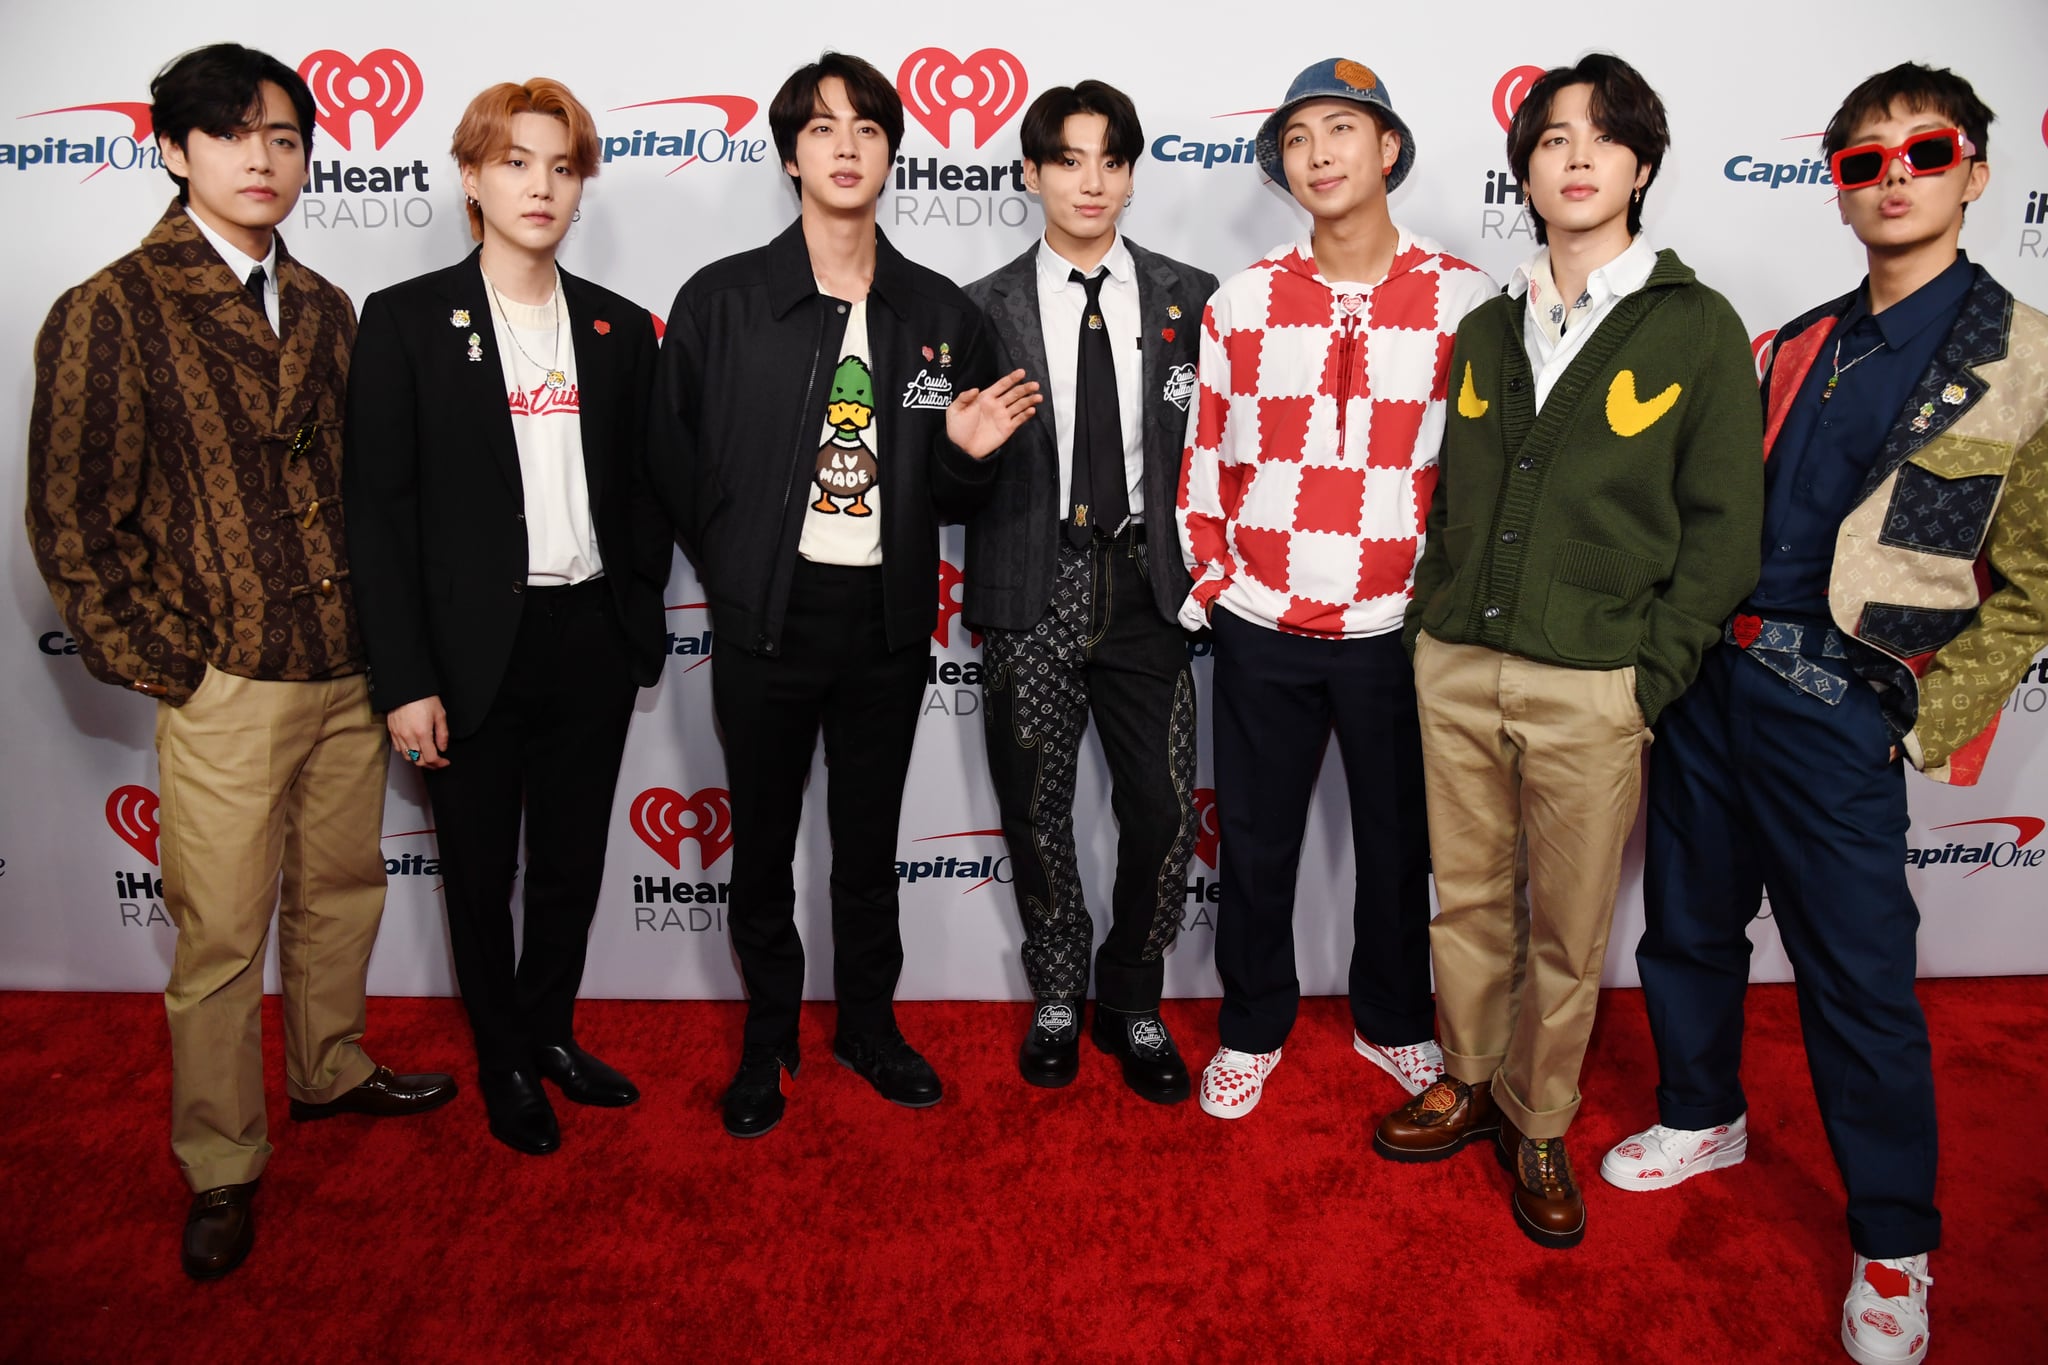 INGLEWOOD, CALIFORNIA - DECEMBER 03: (EDITORIAL USE ONLY) (L-R) V, Suga, Jin, Jungkook, RM, Jimin, and J-Hope of BTS attend iHeartRadio 102.7 KIIS FM's Jingle Ball 2021 presented by Capital One at The Forum on December 03, 2021 in Los Angeles, California. (Photo by Kevin Mazur/Getty Images for iHeartRadio)